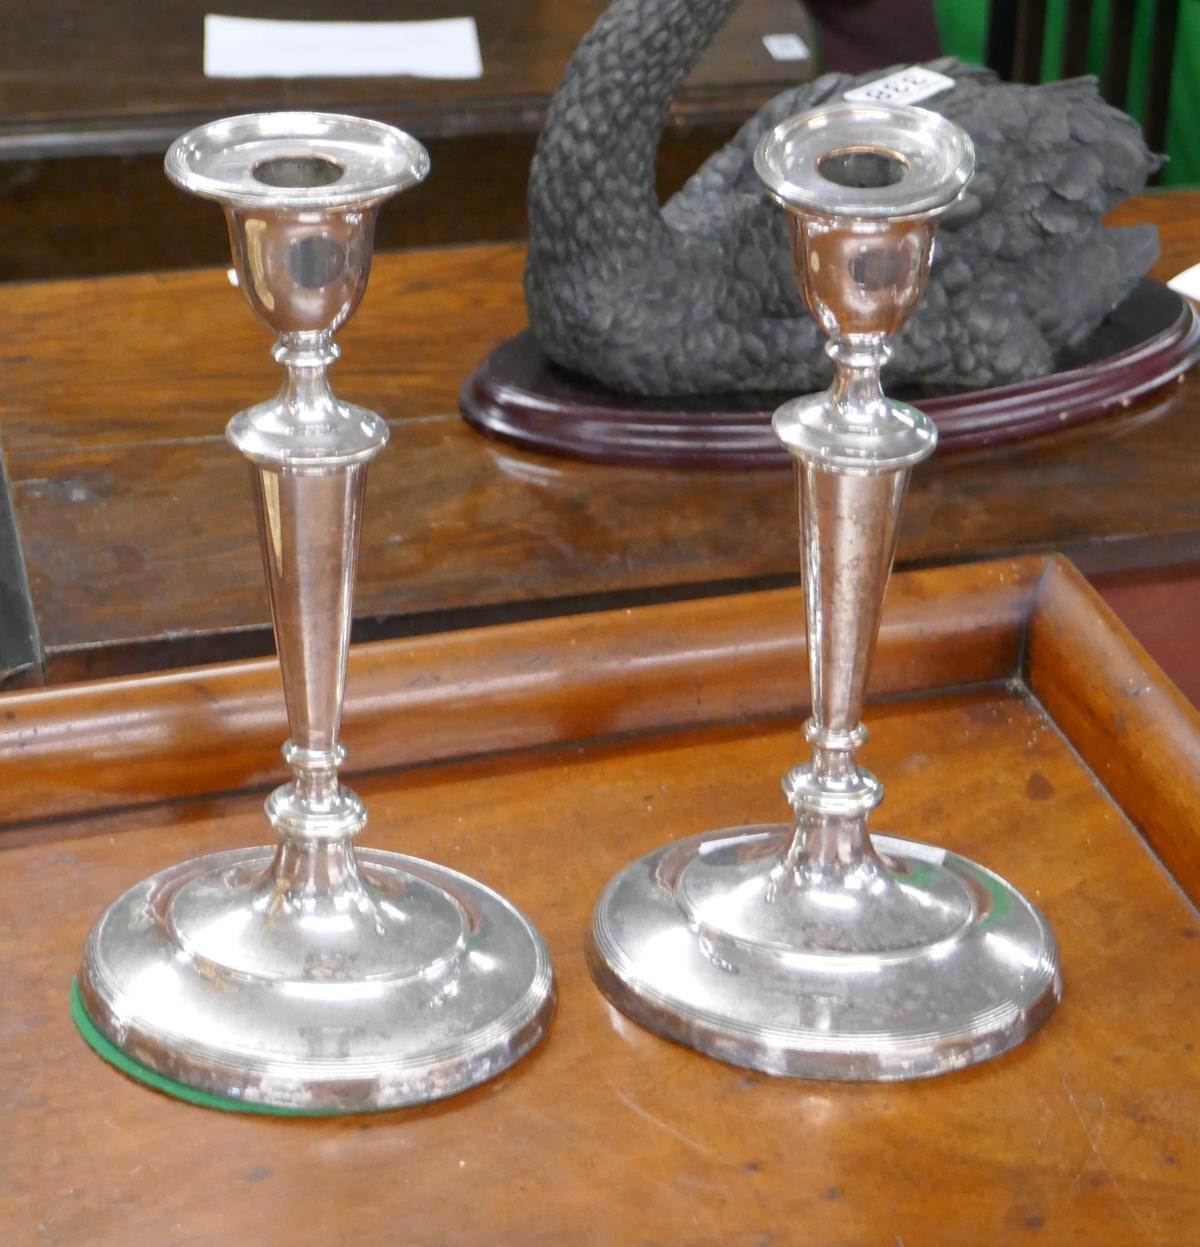 A pair of silver plate candlesticks